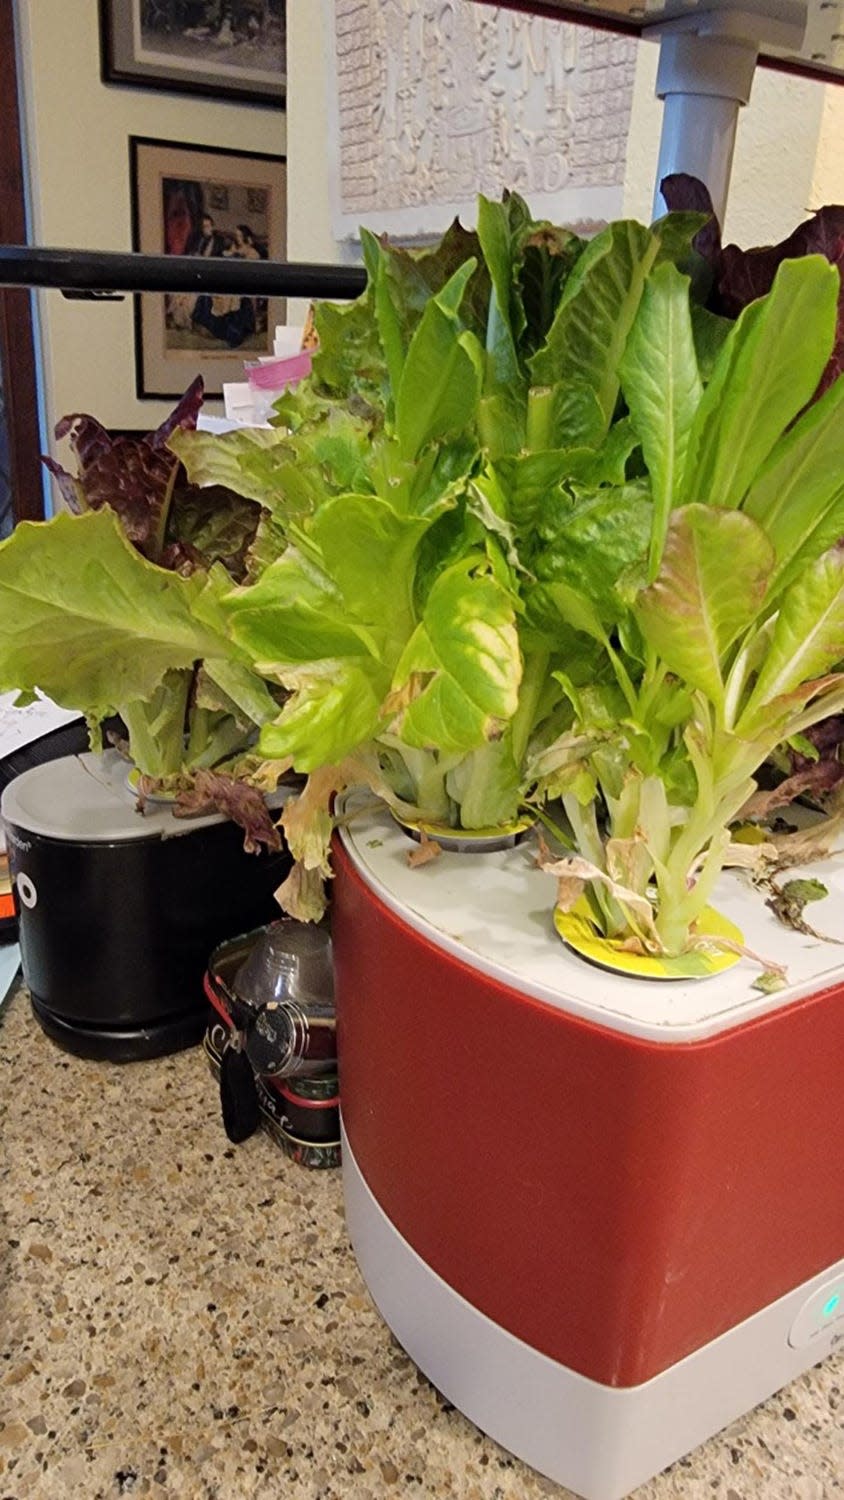 Mixed greens thrive in the author's two hydroponic countertop gardens, a fun guarantee of fresh salad fixings.